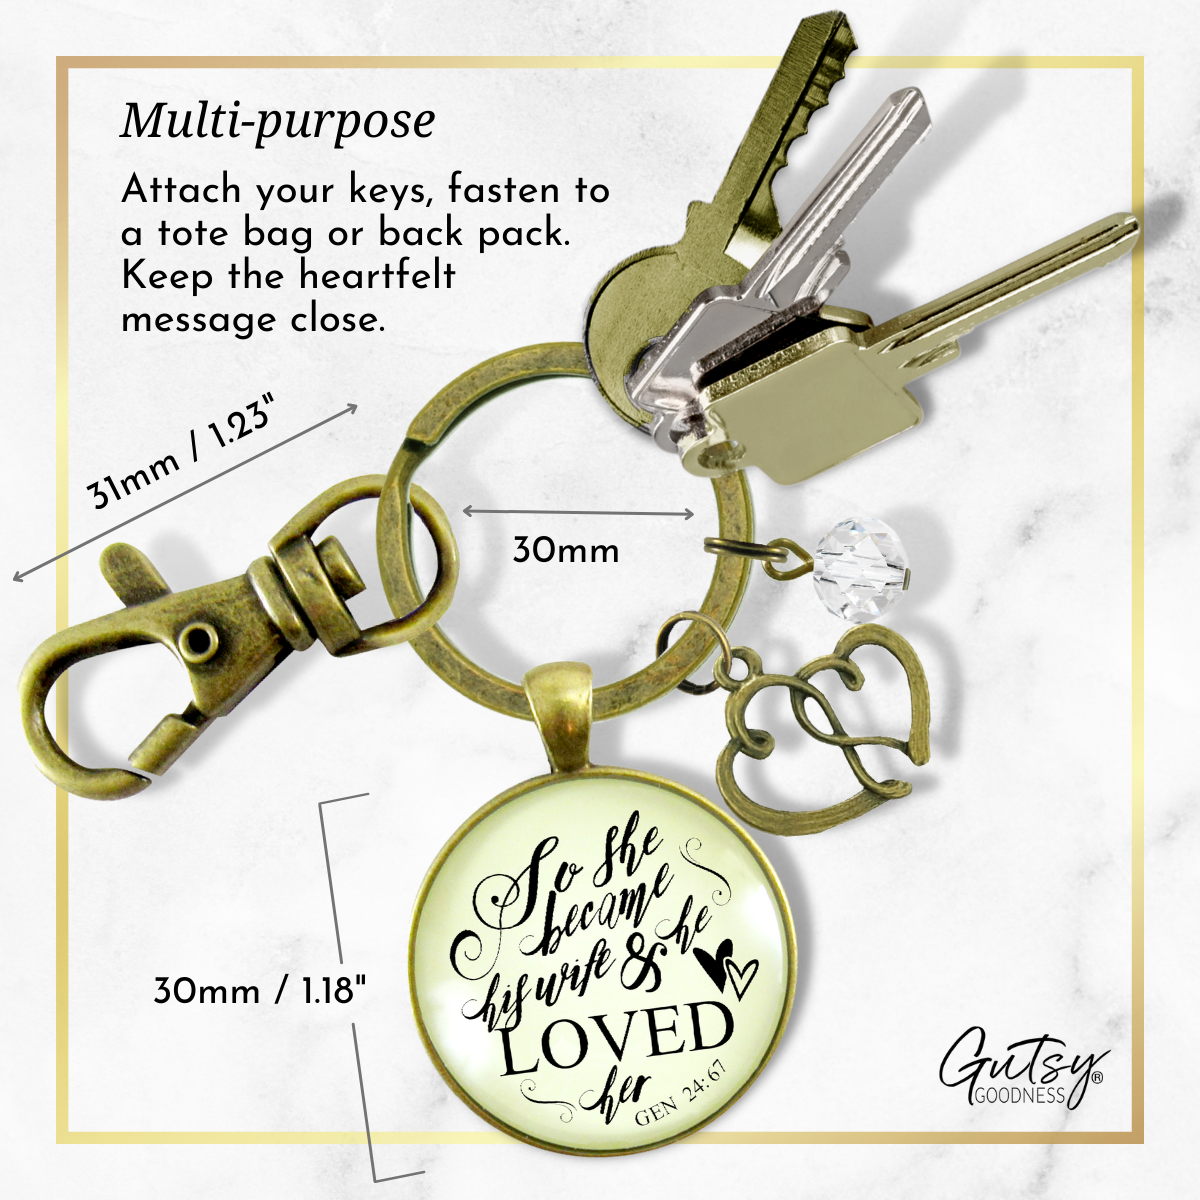 Love My Wife Keychain She Became His Wife He Loved Her Faith Inspired Jewelry Gift  Keychain - Women - Gutsy Goodness Handmade Jewelry